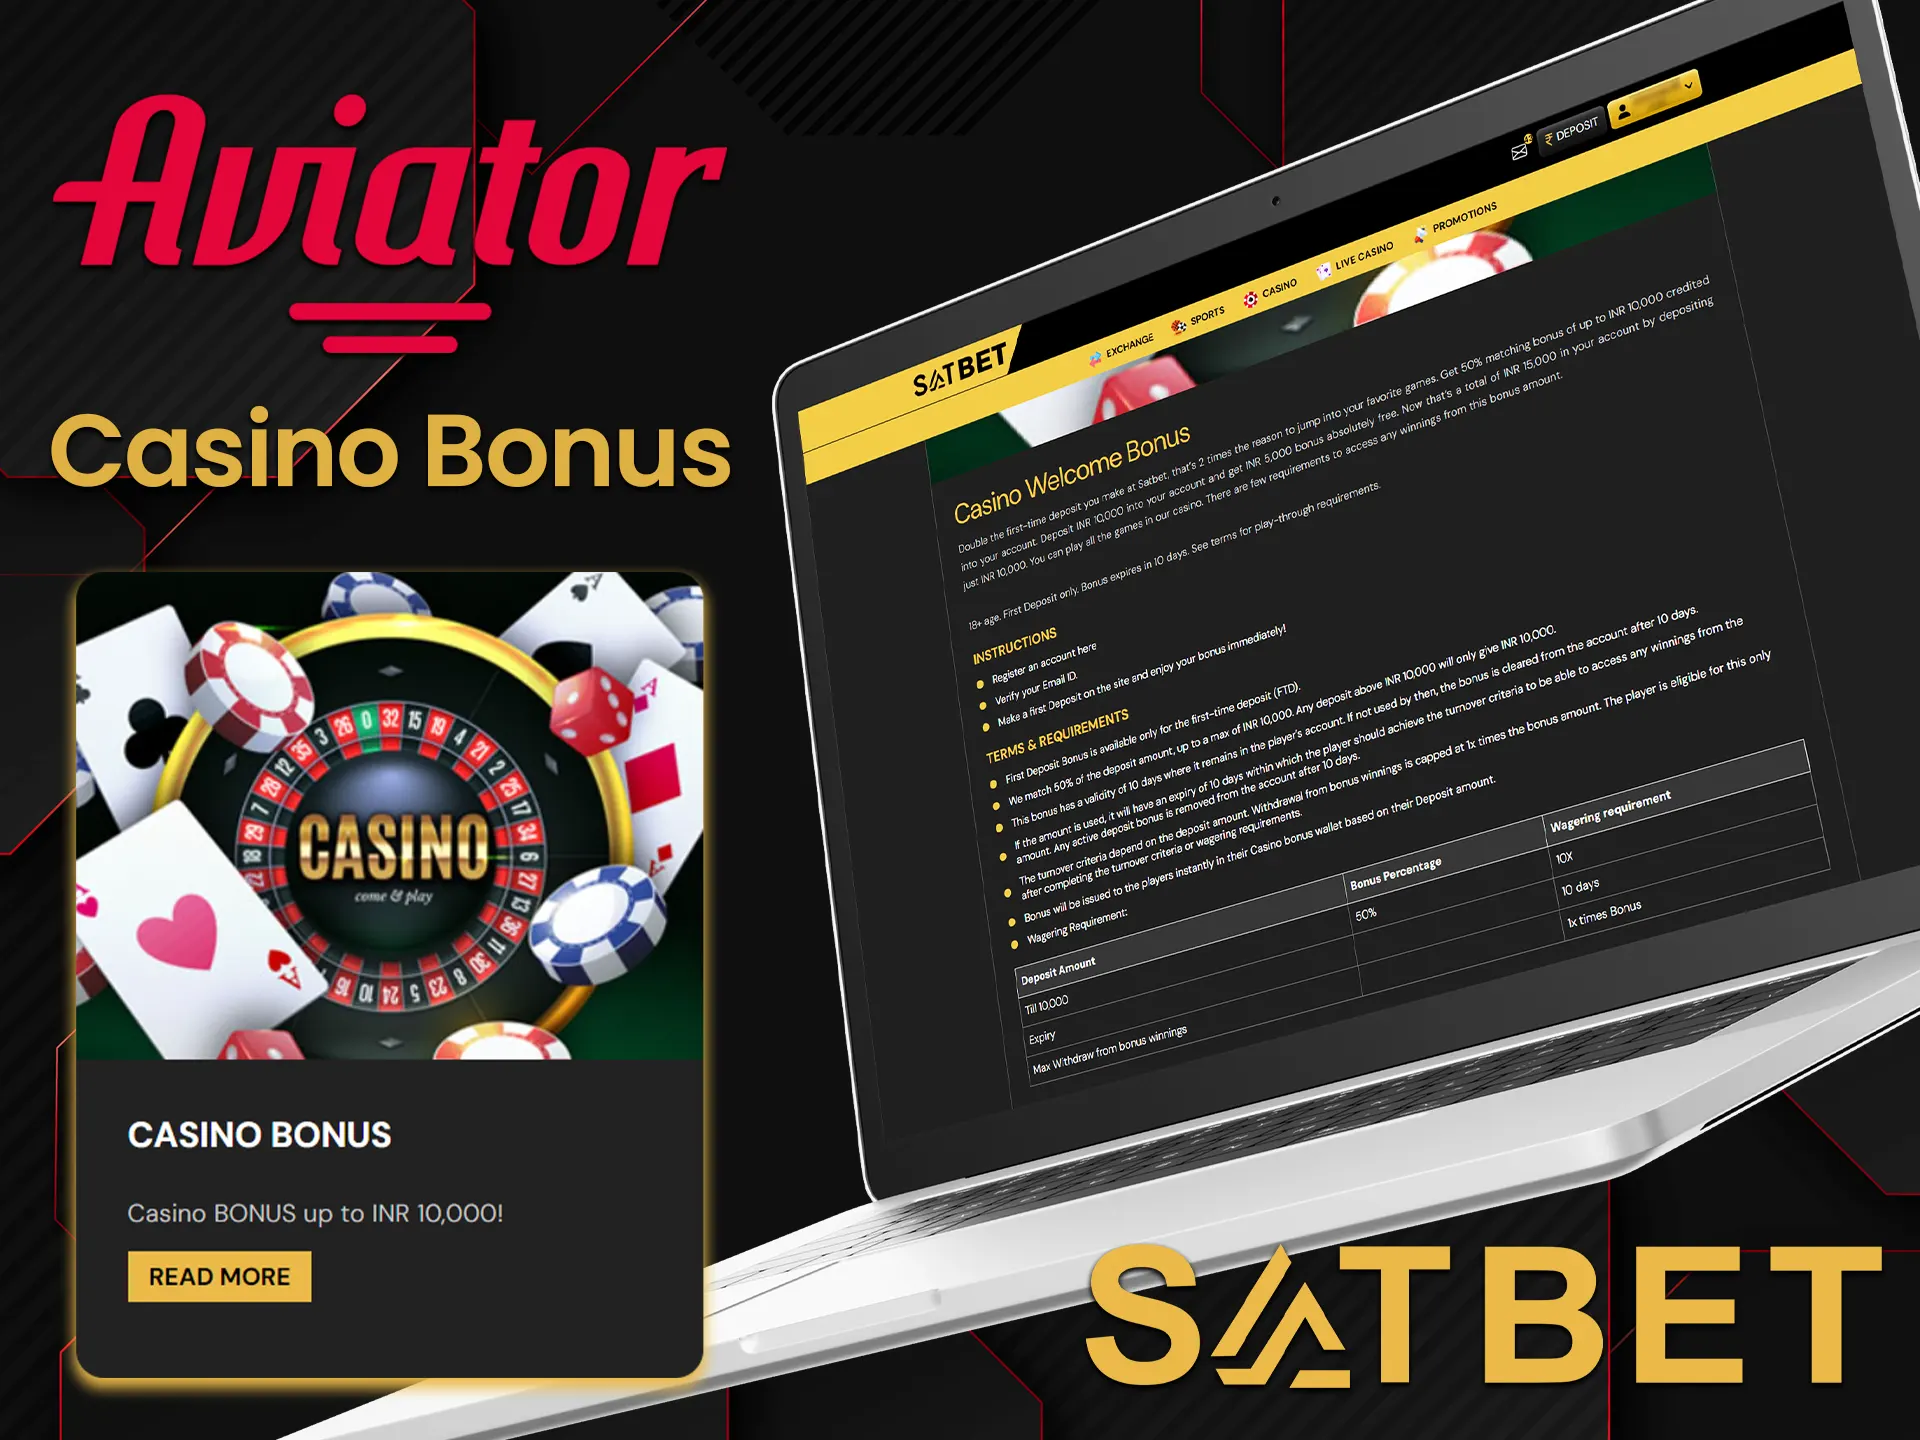 Activate your welcome bonus at Satbet and use it in the Aviator game.